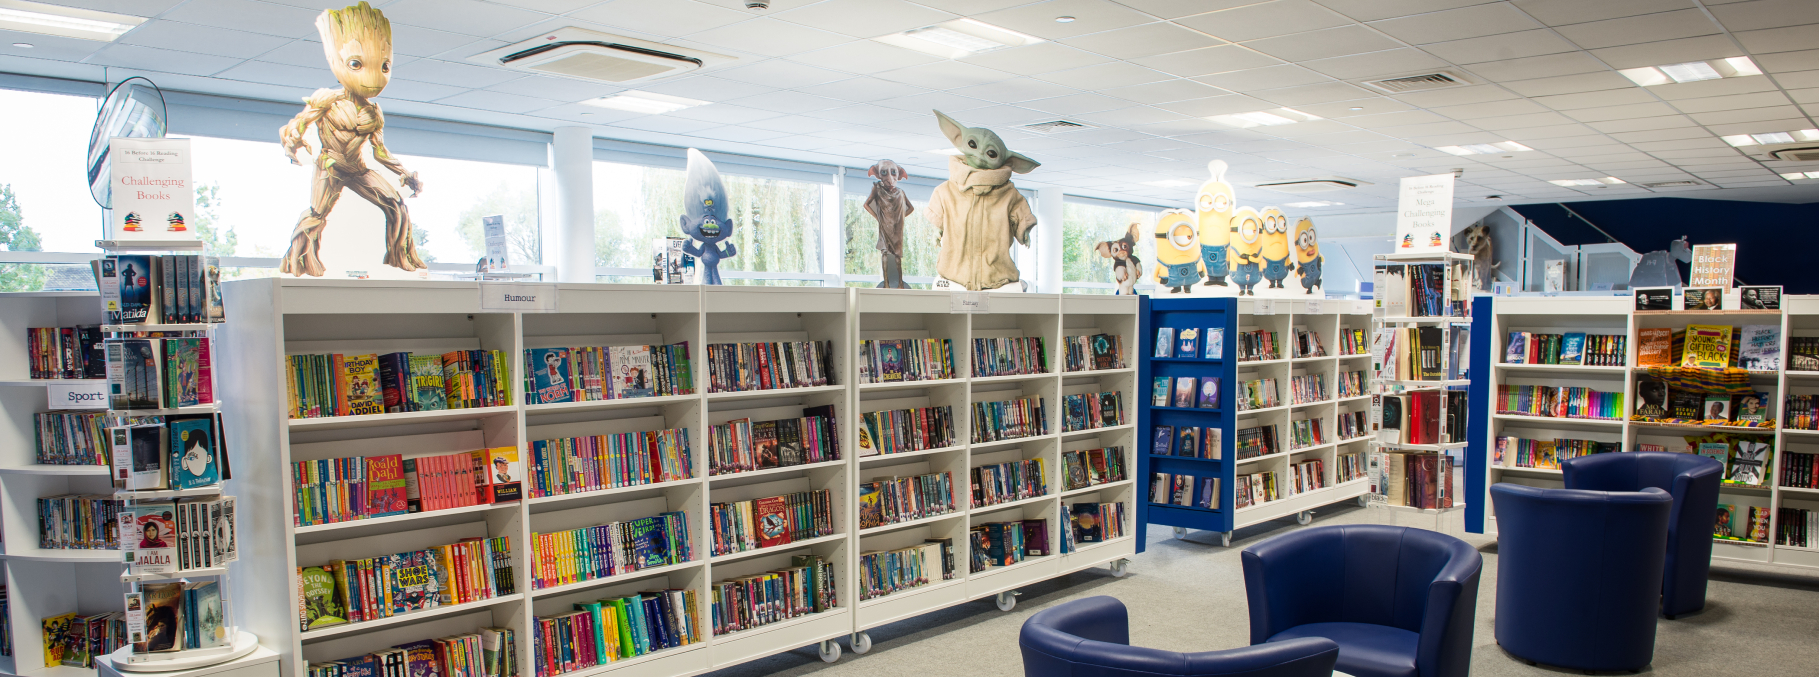 An image showing the schools library